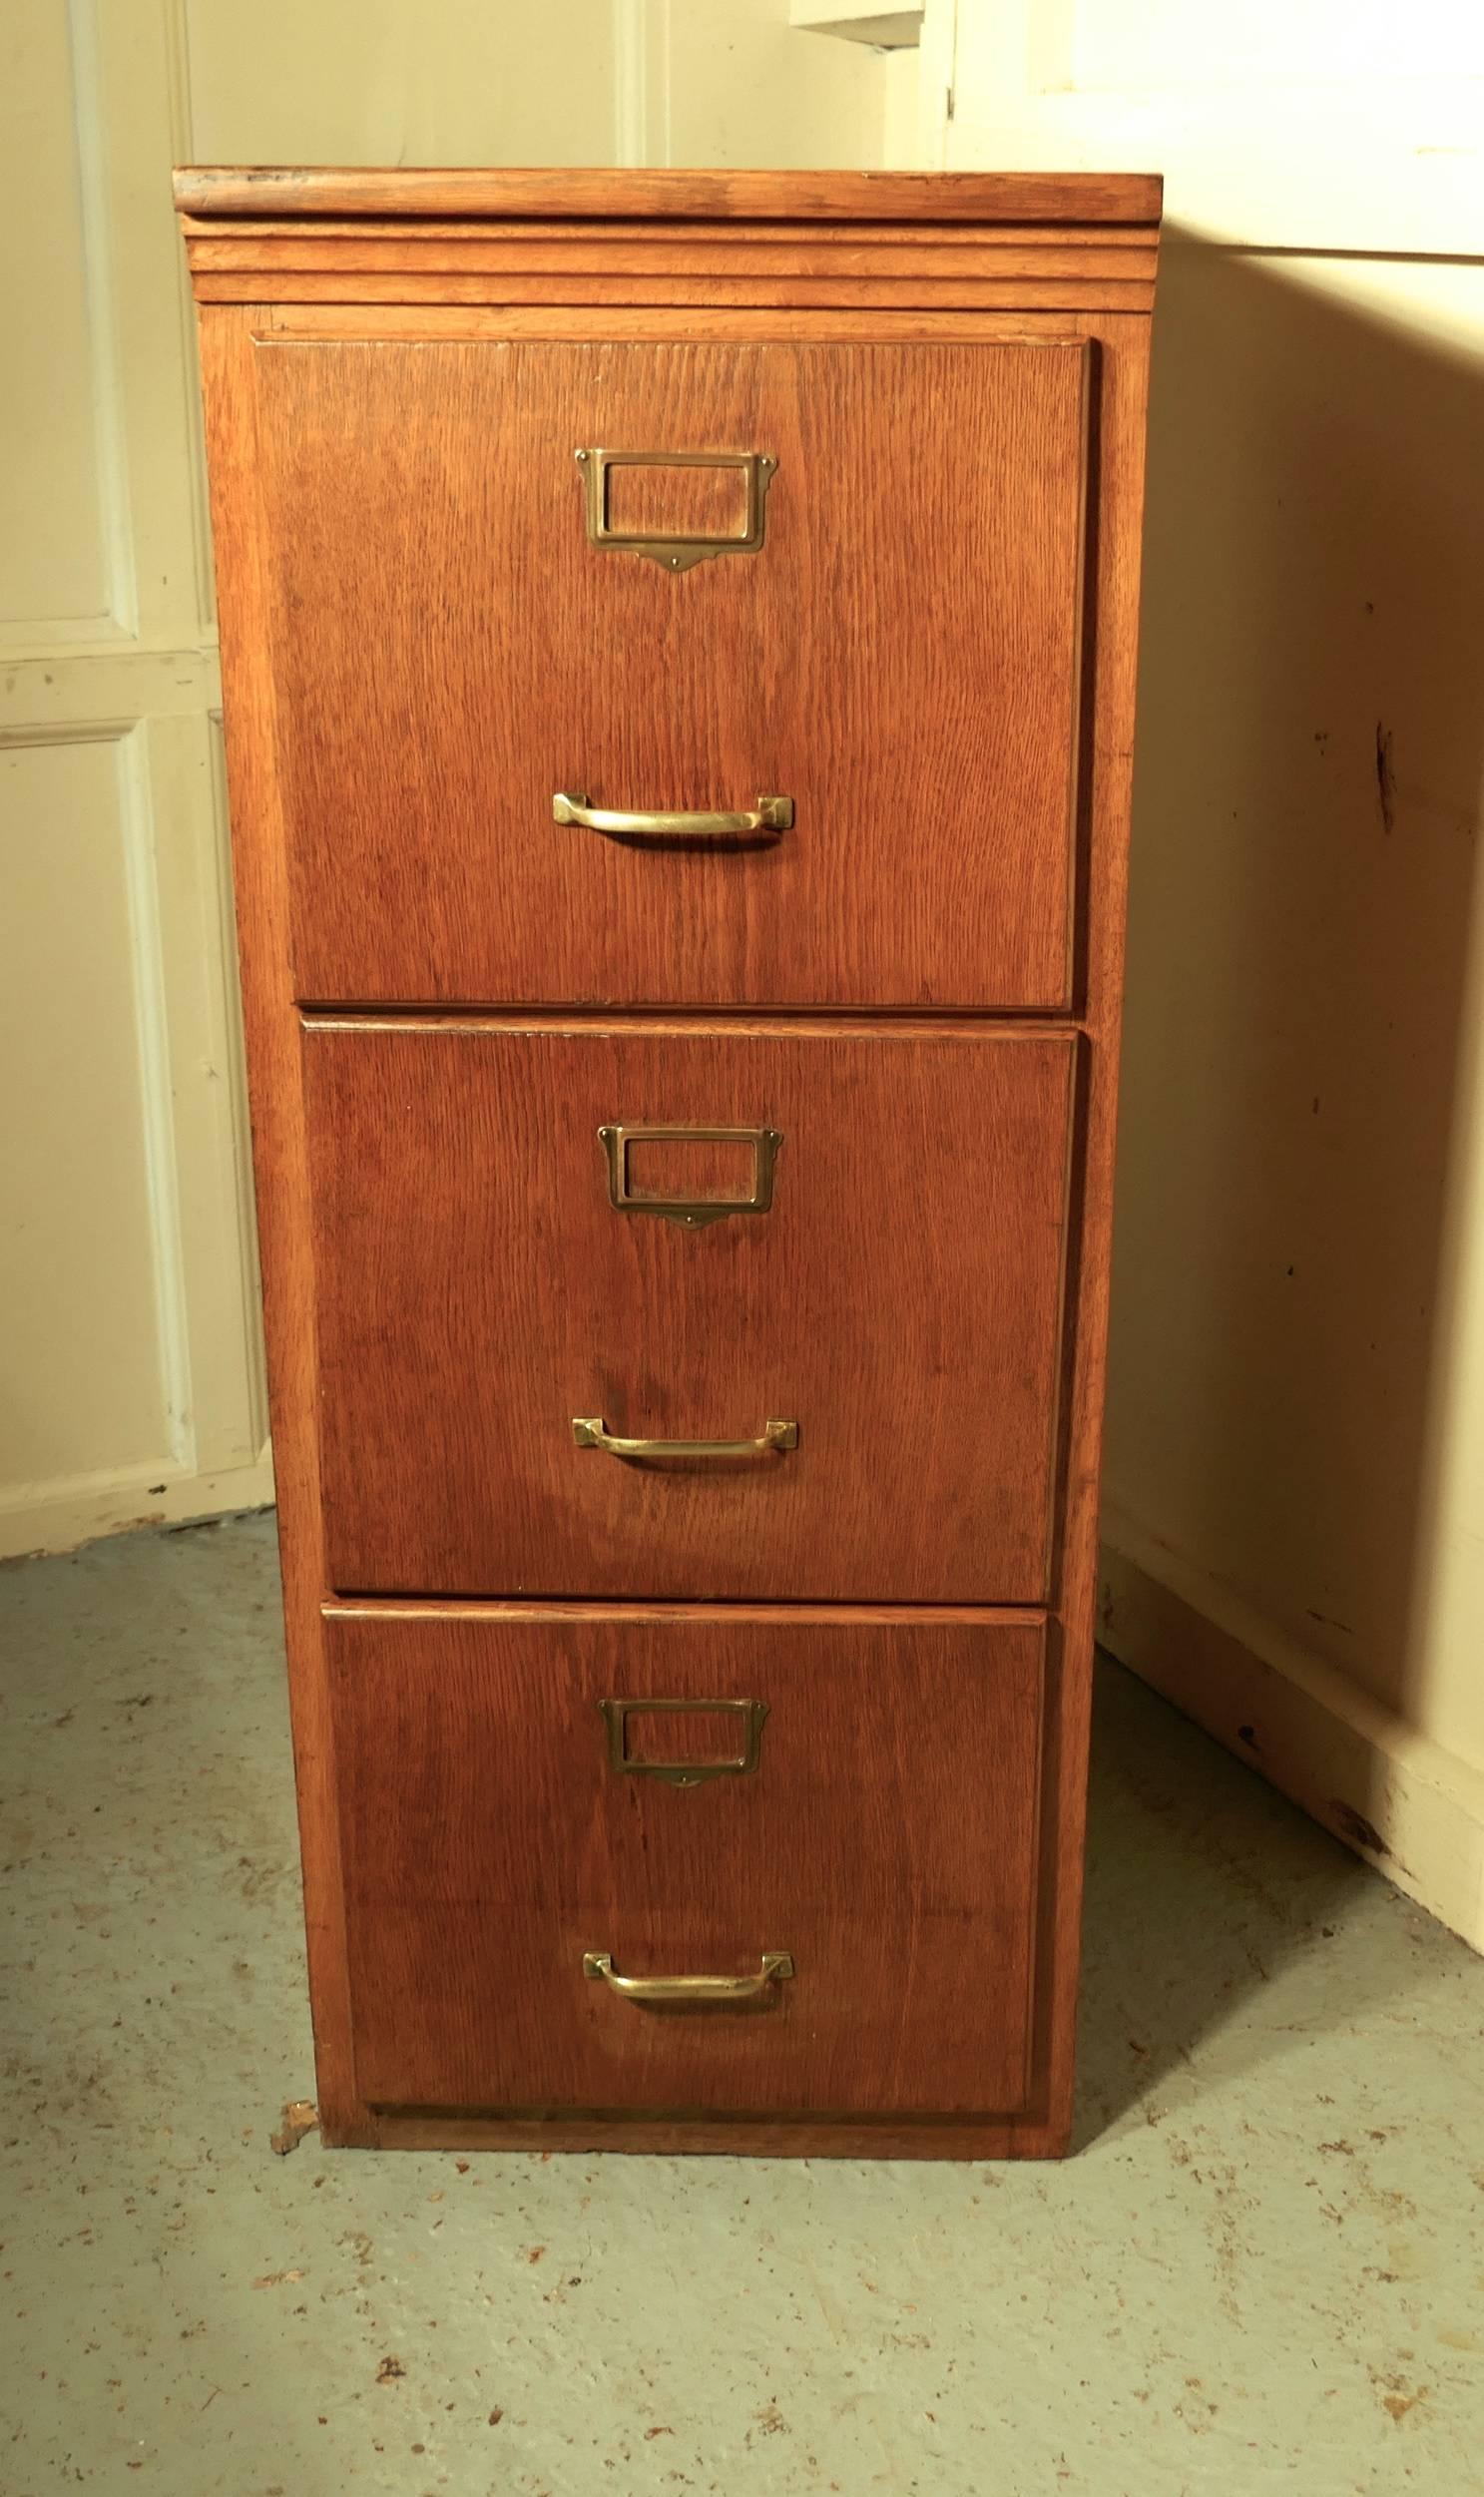 Large Edwardian three-drawer oak filing cabinet

This is an absolute must for every home office or study, the cabinet has three deep and roomy drawers, they all glide smoothly and have brass handles and card holders on the front, they will